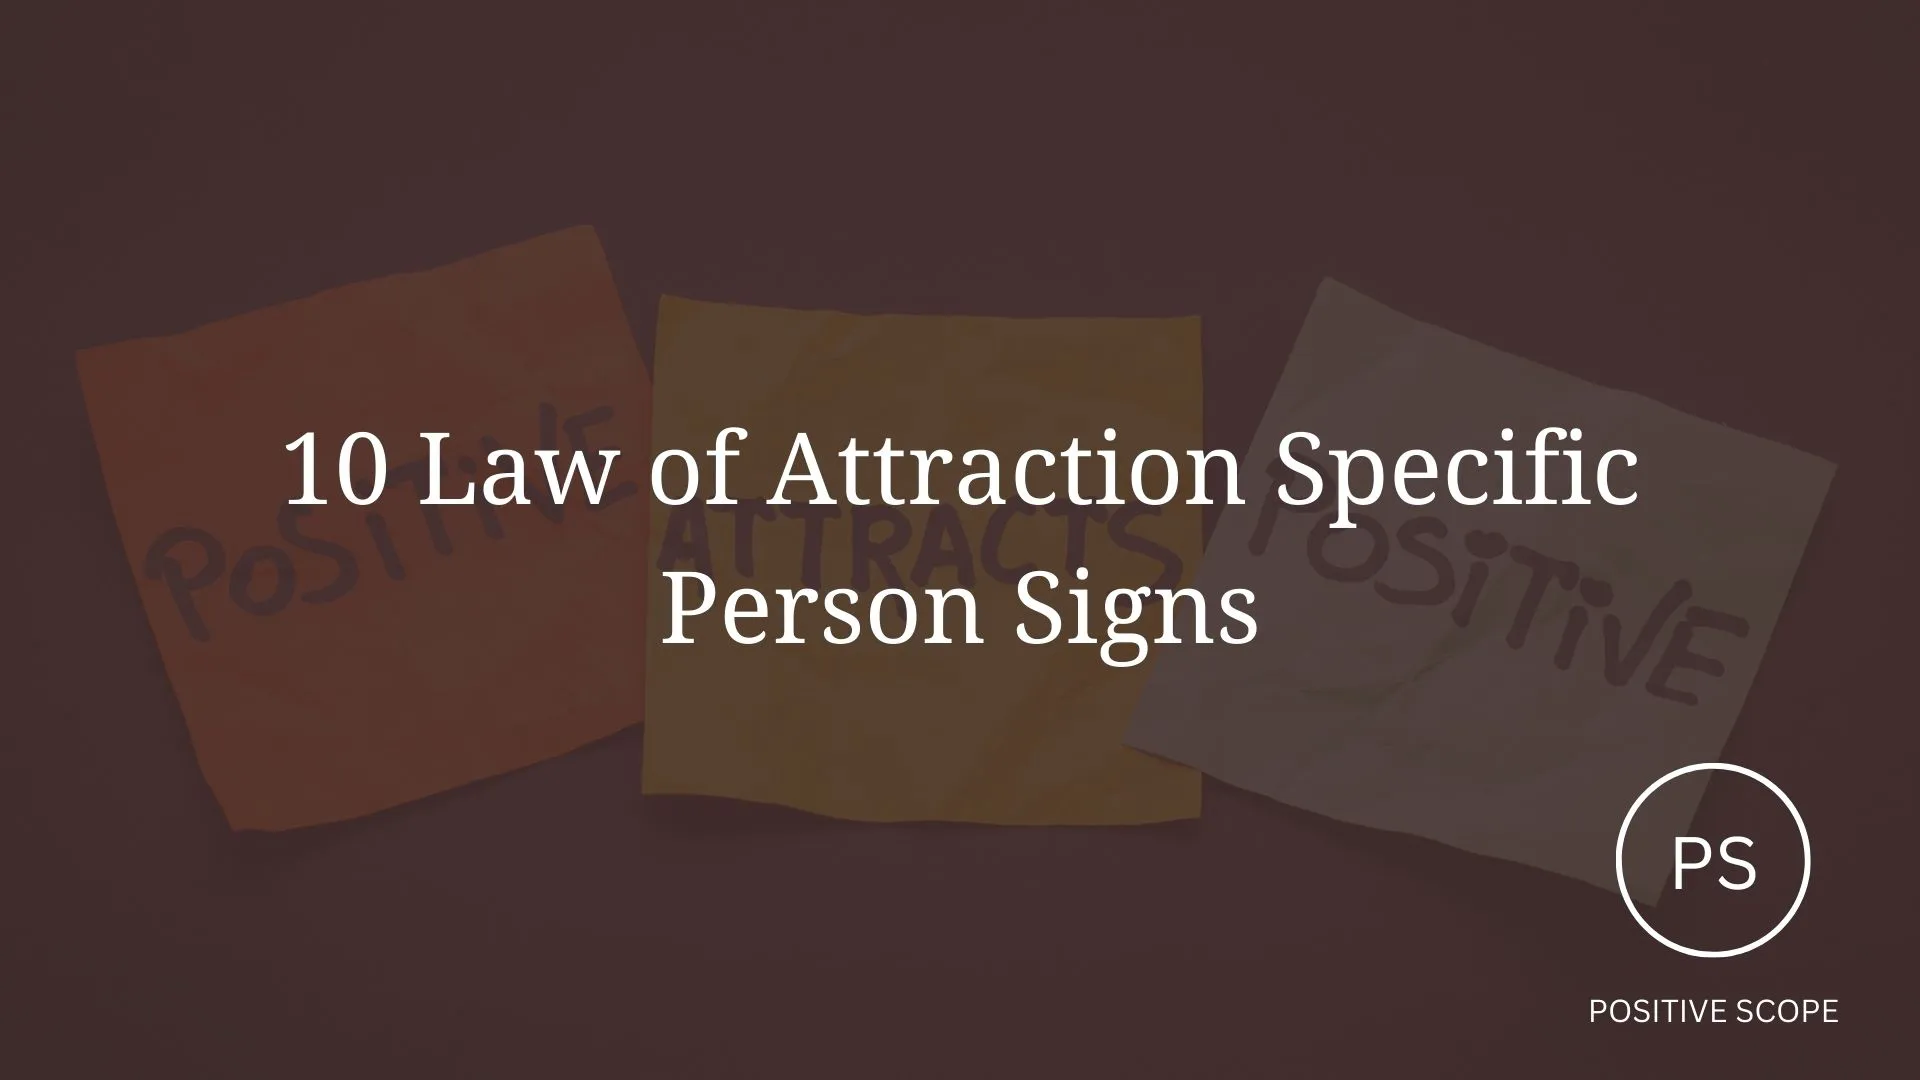 10 Law of Attraction Specific Person Signs